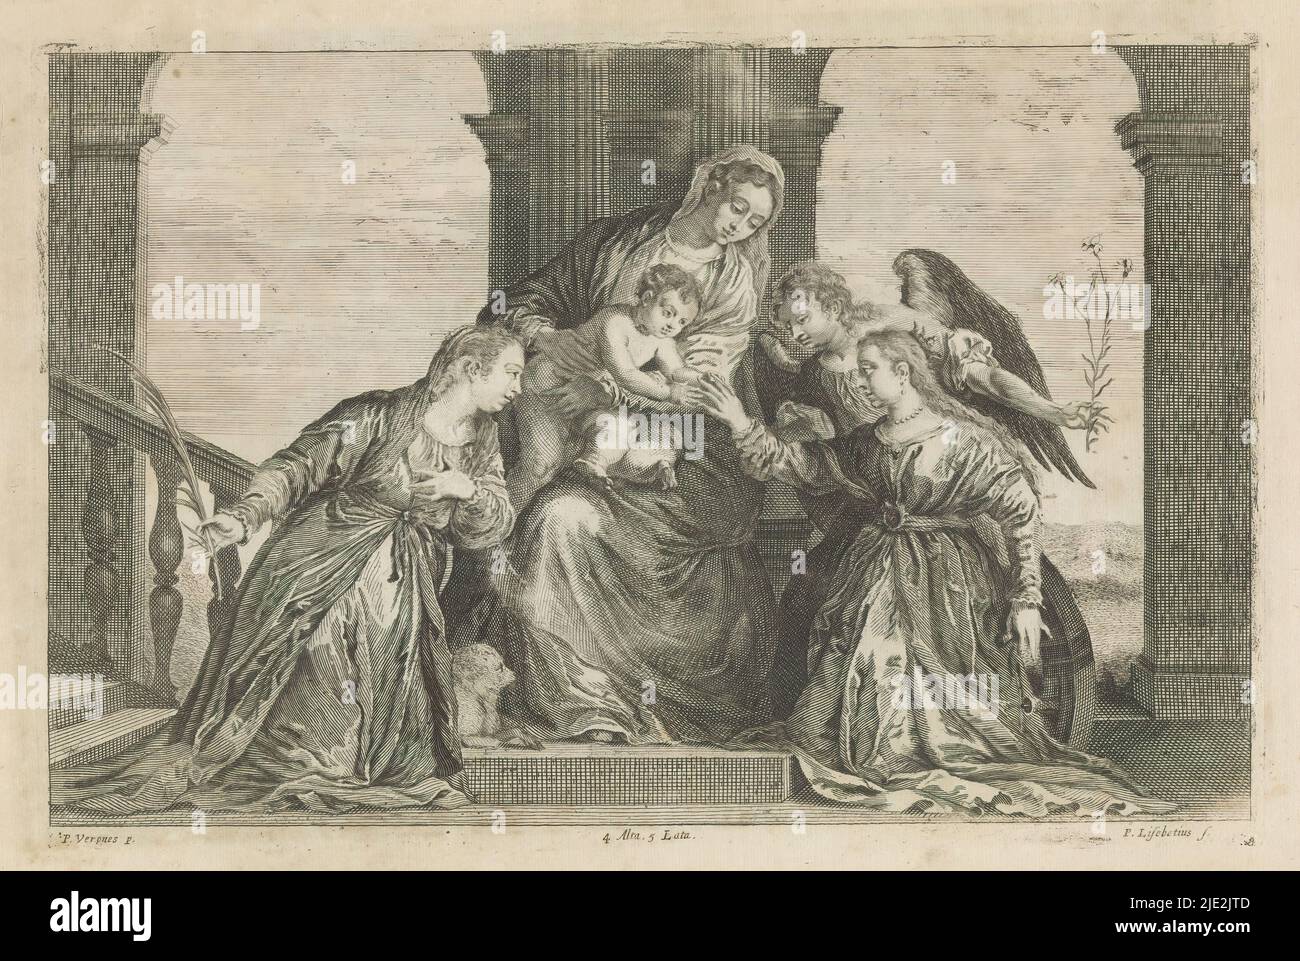 Mystical Marriage of St. Catherine of Alexandria, Christ sits on Mary's lap and slips a ring on St. Catherine's finger. An angel supports her arm. On the left, the kneeling Saint Agnes with the martyr's palm. This print is part of an album., print maker: Peter van Liesebetten, (mentioned on object), after painting by: Paolo Veronese, (mentioned on object), publisher: David Teniers (II), print maker: Antwerp, after painting by: Italy, publisher: Brussels, 1660, paper, etching, engraving, height 202 mm × width 308 mm Stock Photo